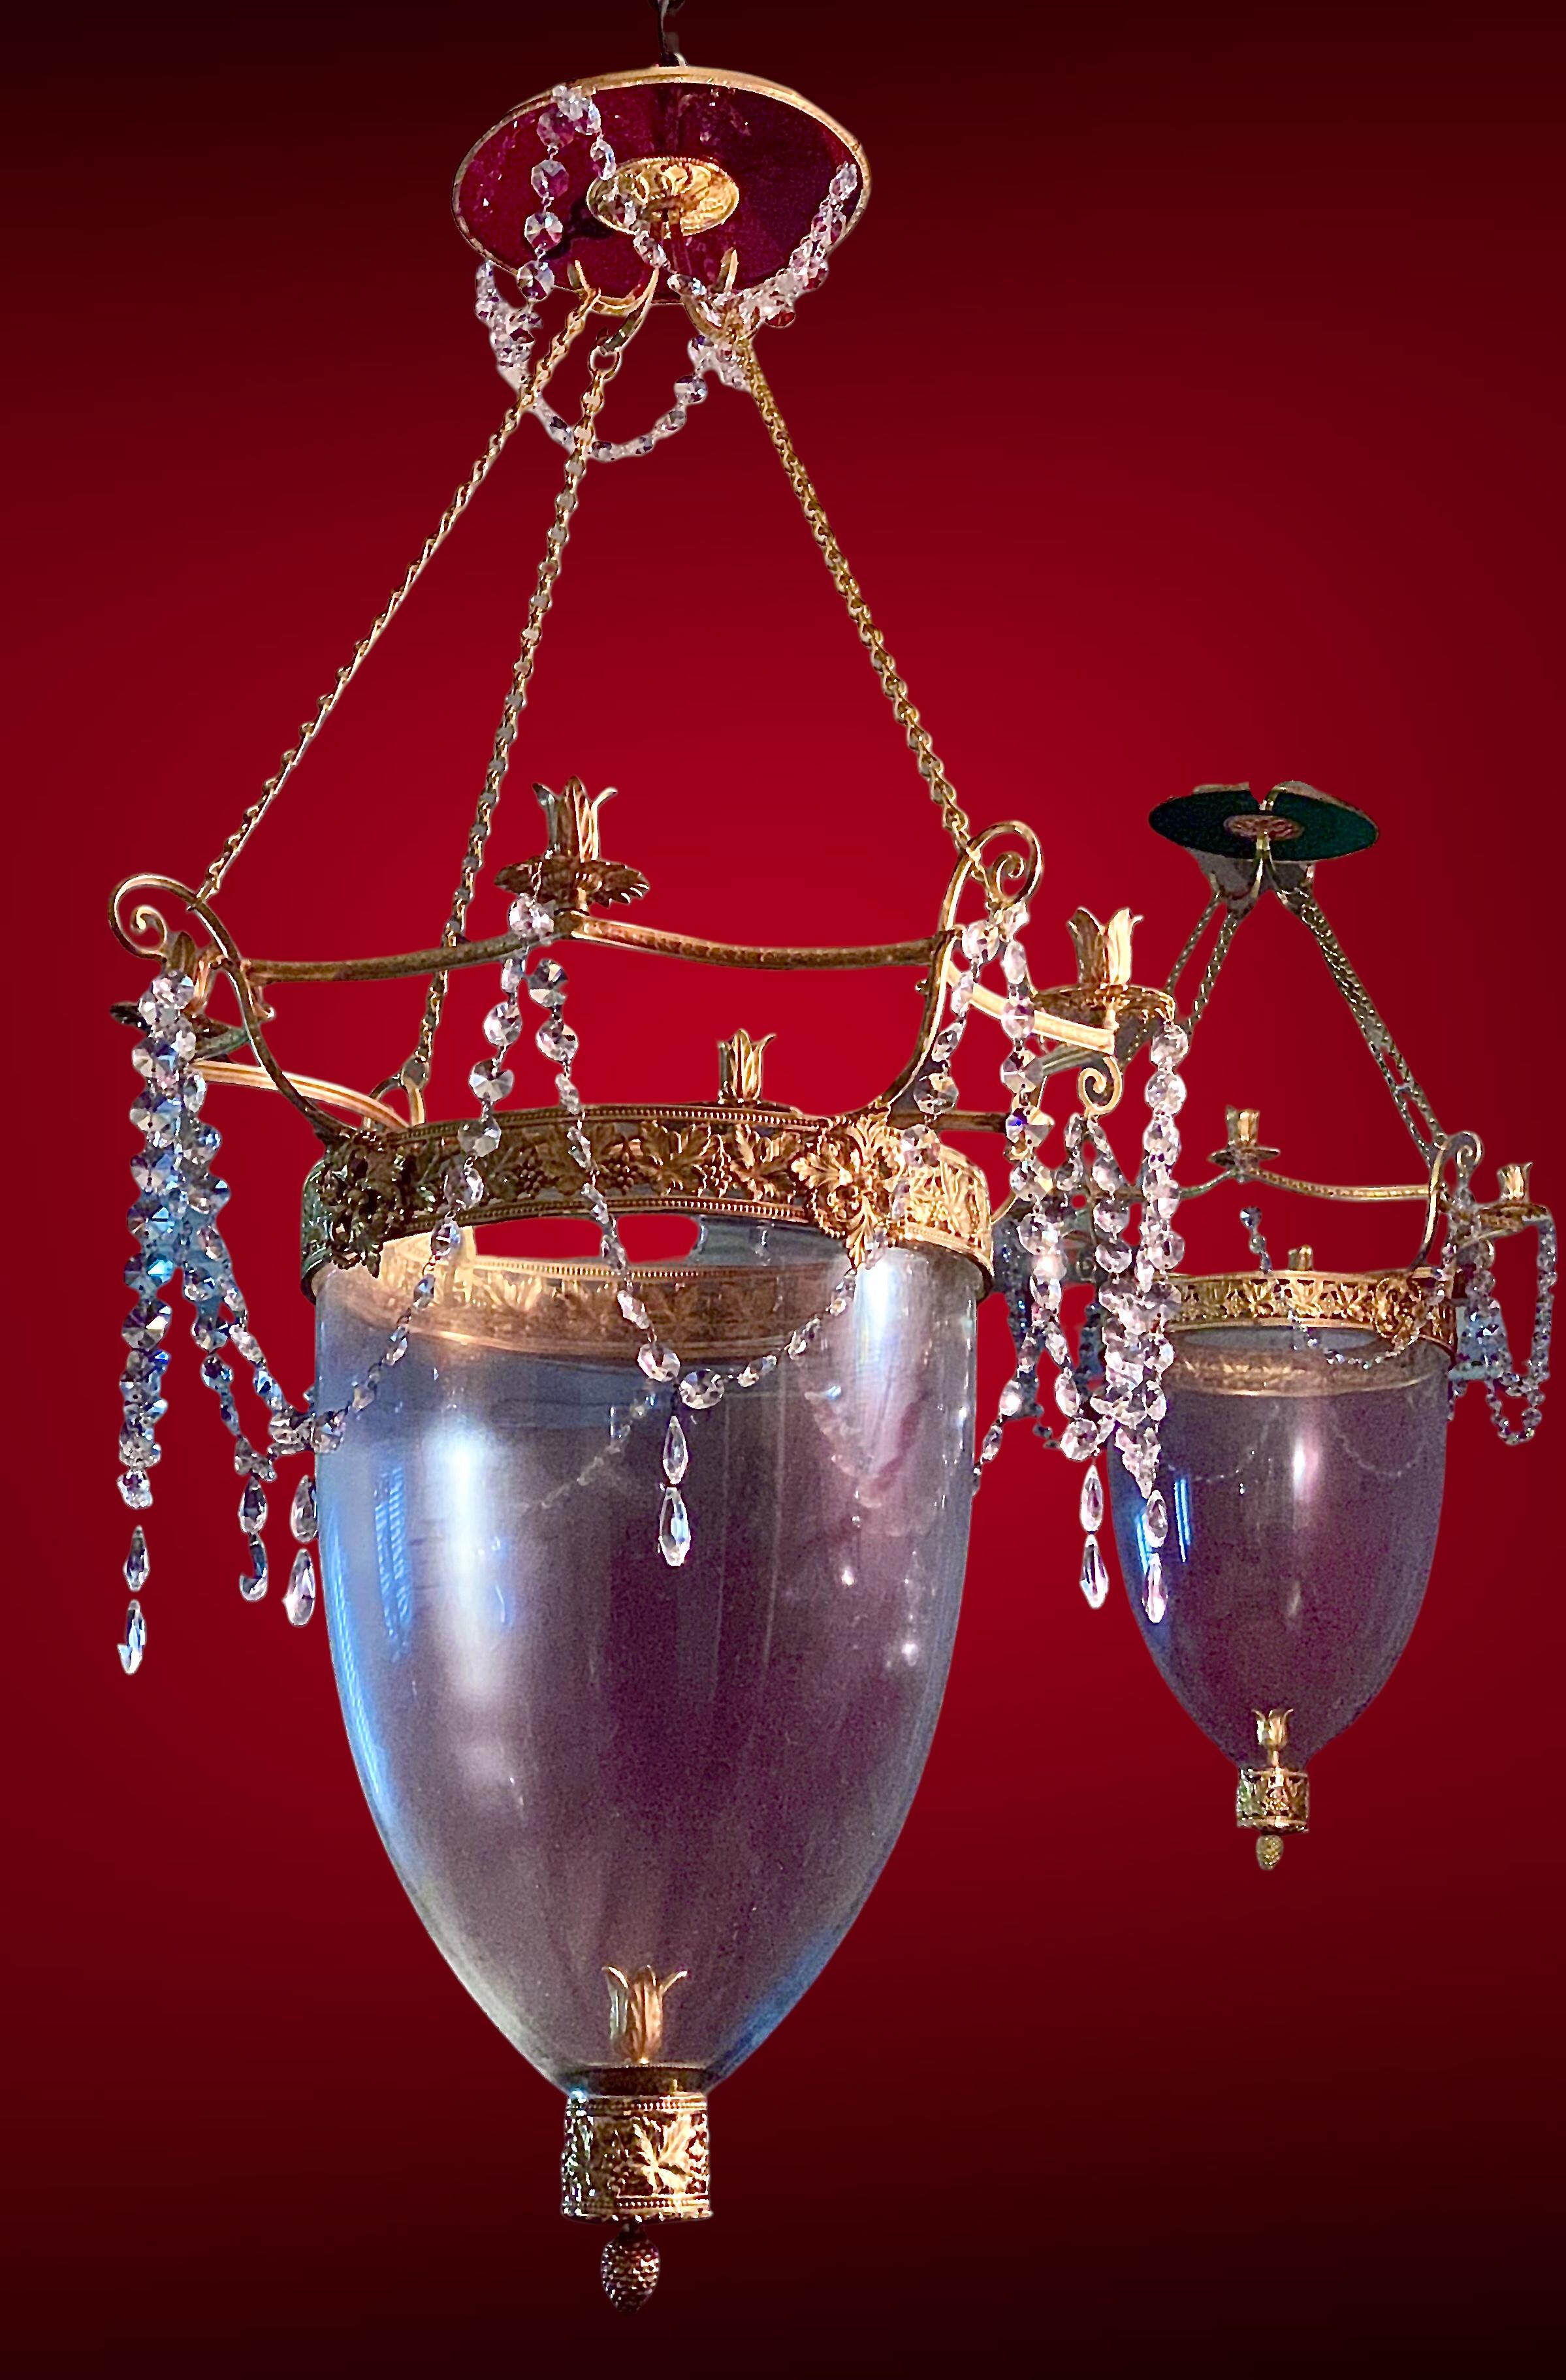 A pair of large Neo classical Lanterns in Baltic Directoire style,  4 lights, clear crystal bowl, overcome by a green crystal disc ,  gilt bronze fixings with foliage and grapes motives. Adorned with crystal almonds chains  and drops. 
Heigh  could